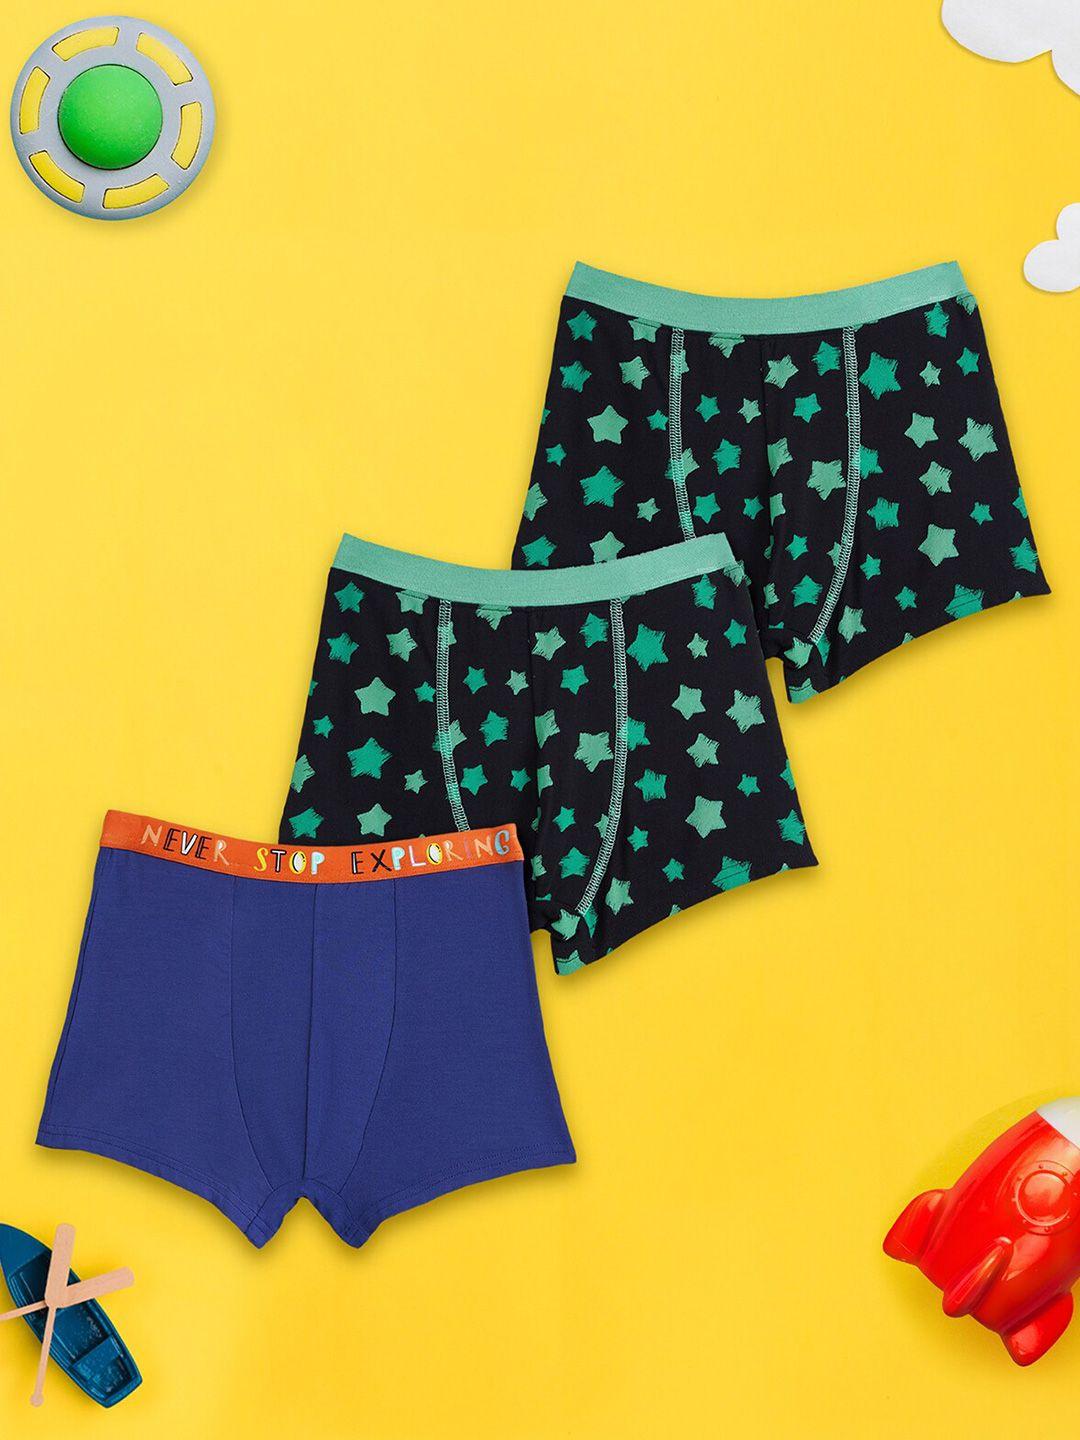 xy life boys pack of 3 printed moisture absorbent trunks lbtrnk3pckn06